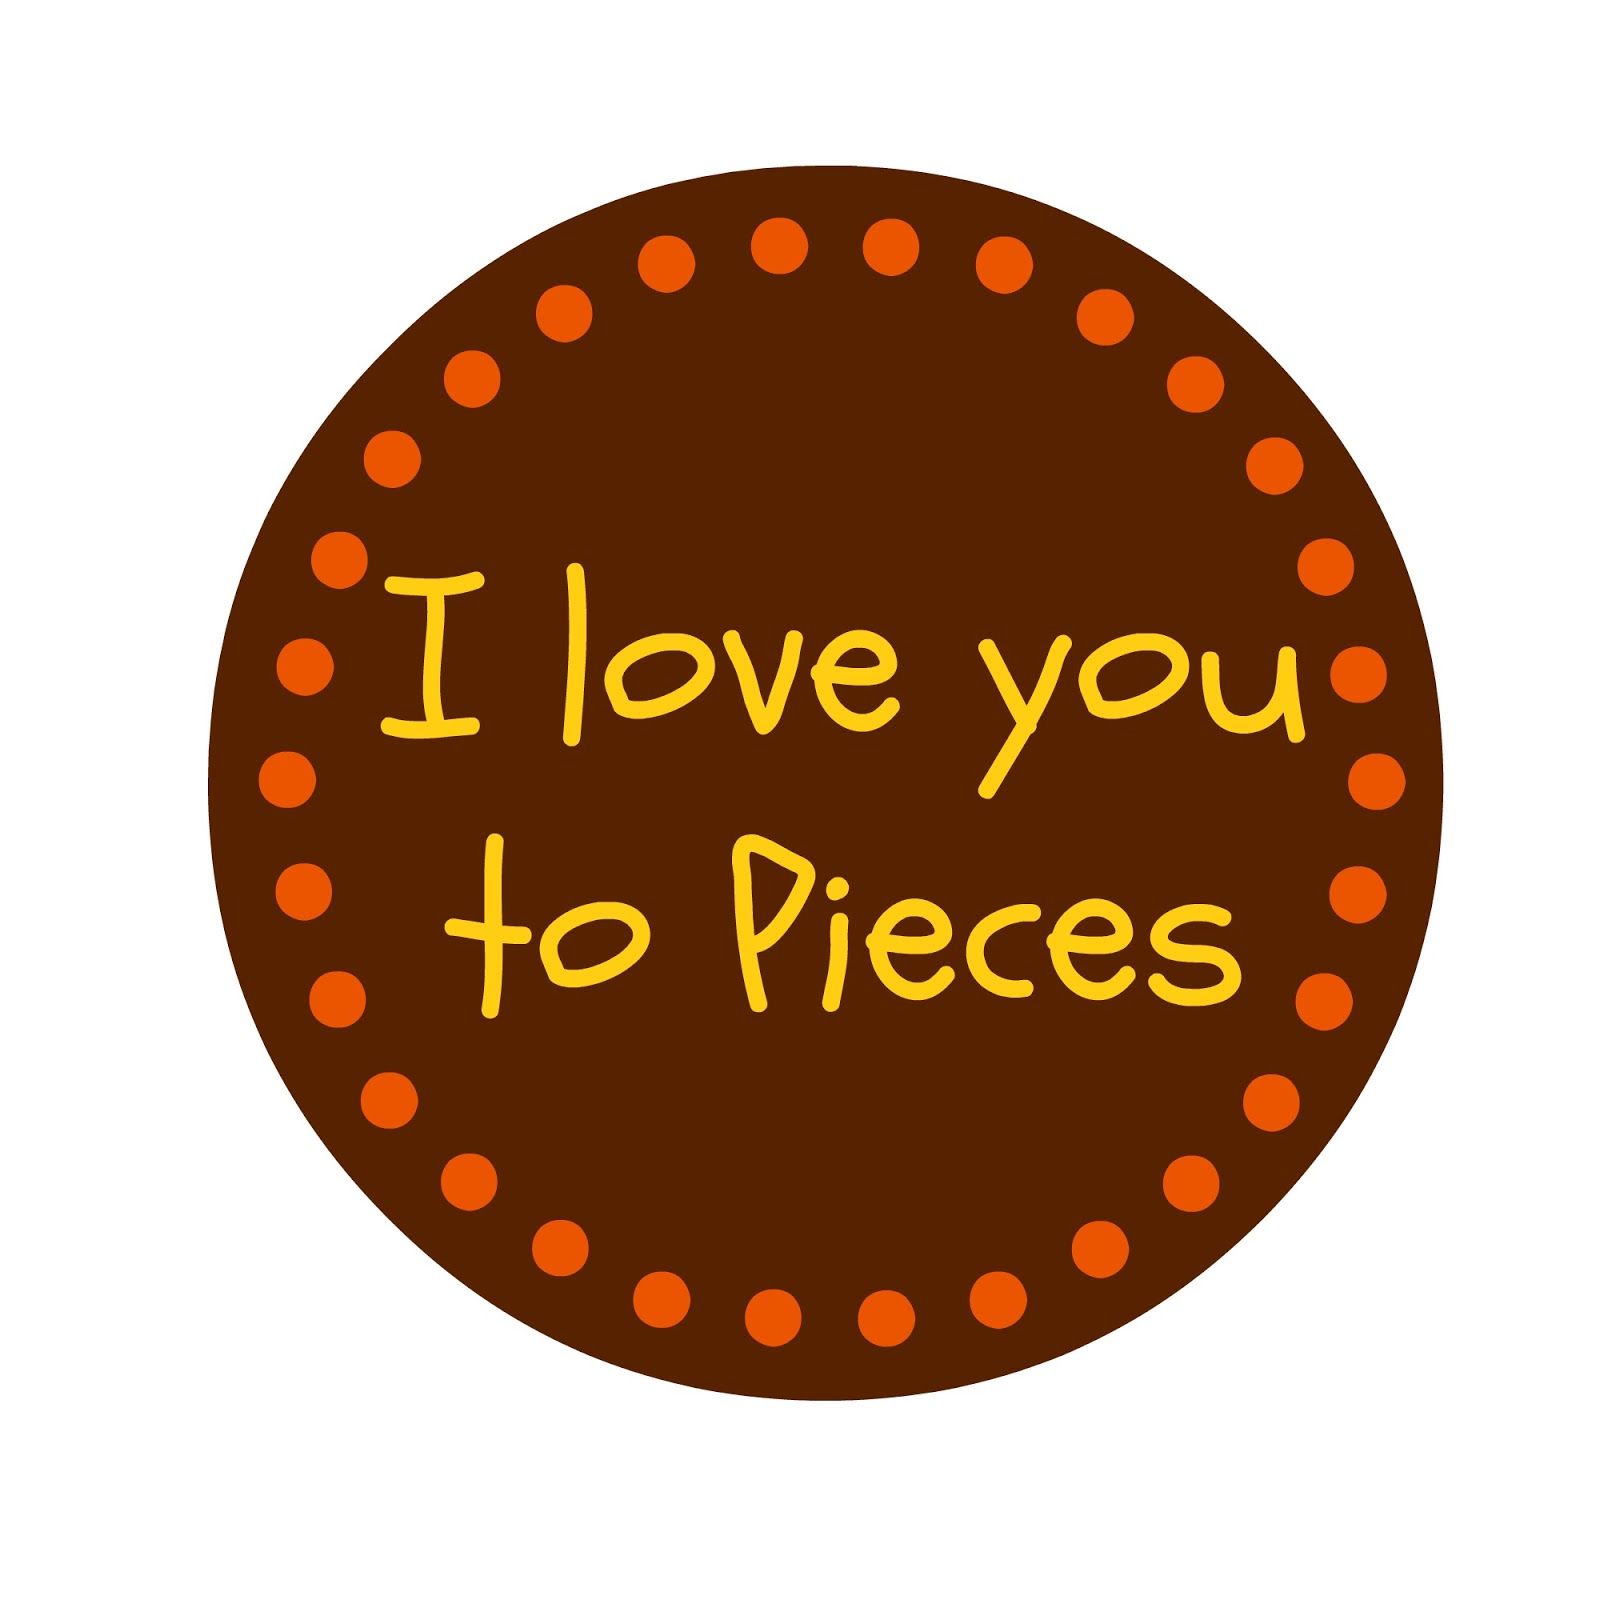 6-best-images-of-i-love-you-to-pieces-printable-tag-love-you-to